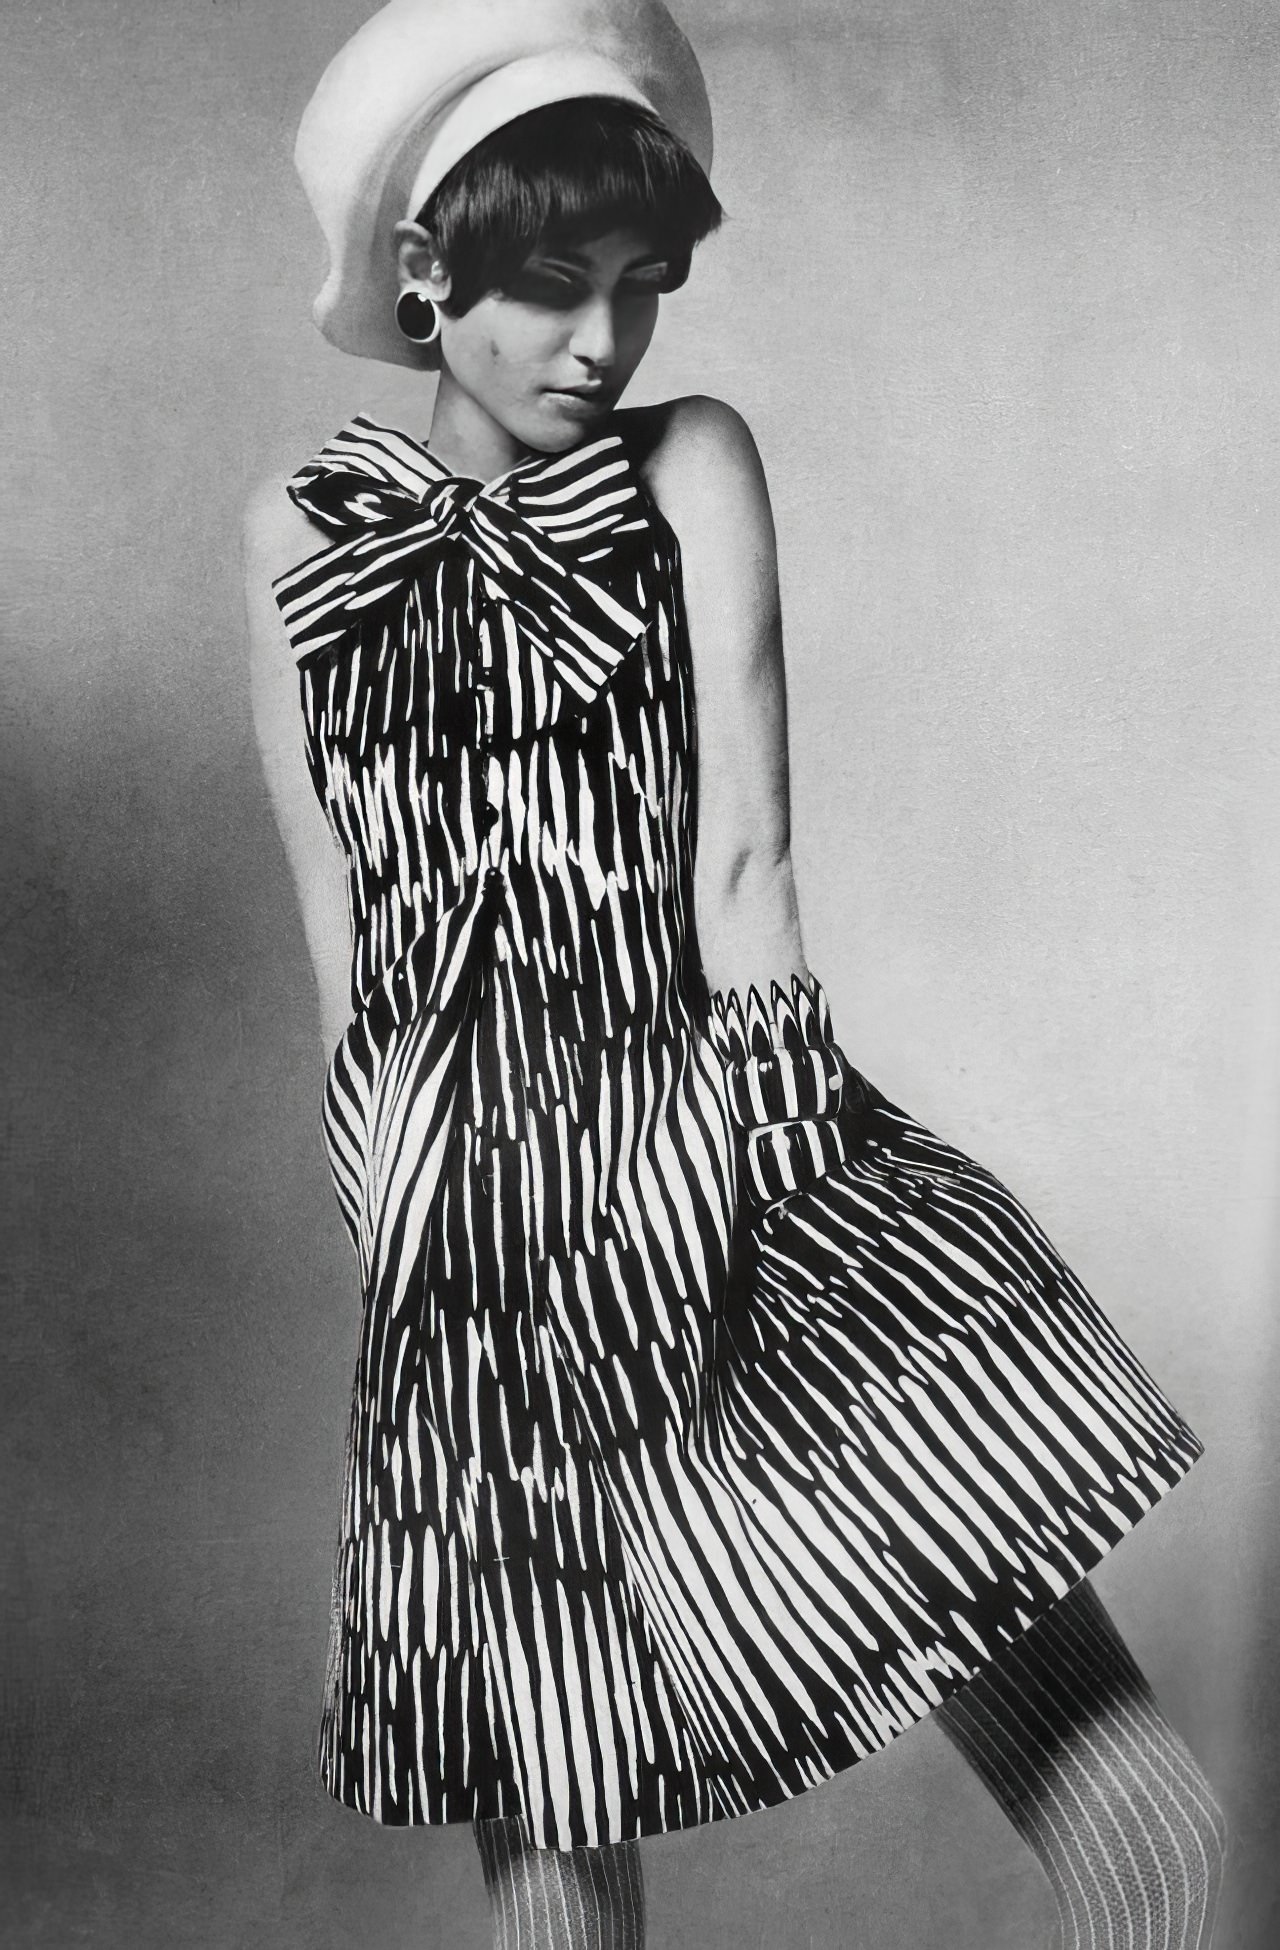 Benedetta Barzini in a black and white dress by Geoffrey Beene, Vogue US, April 1967.